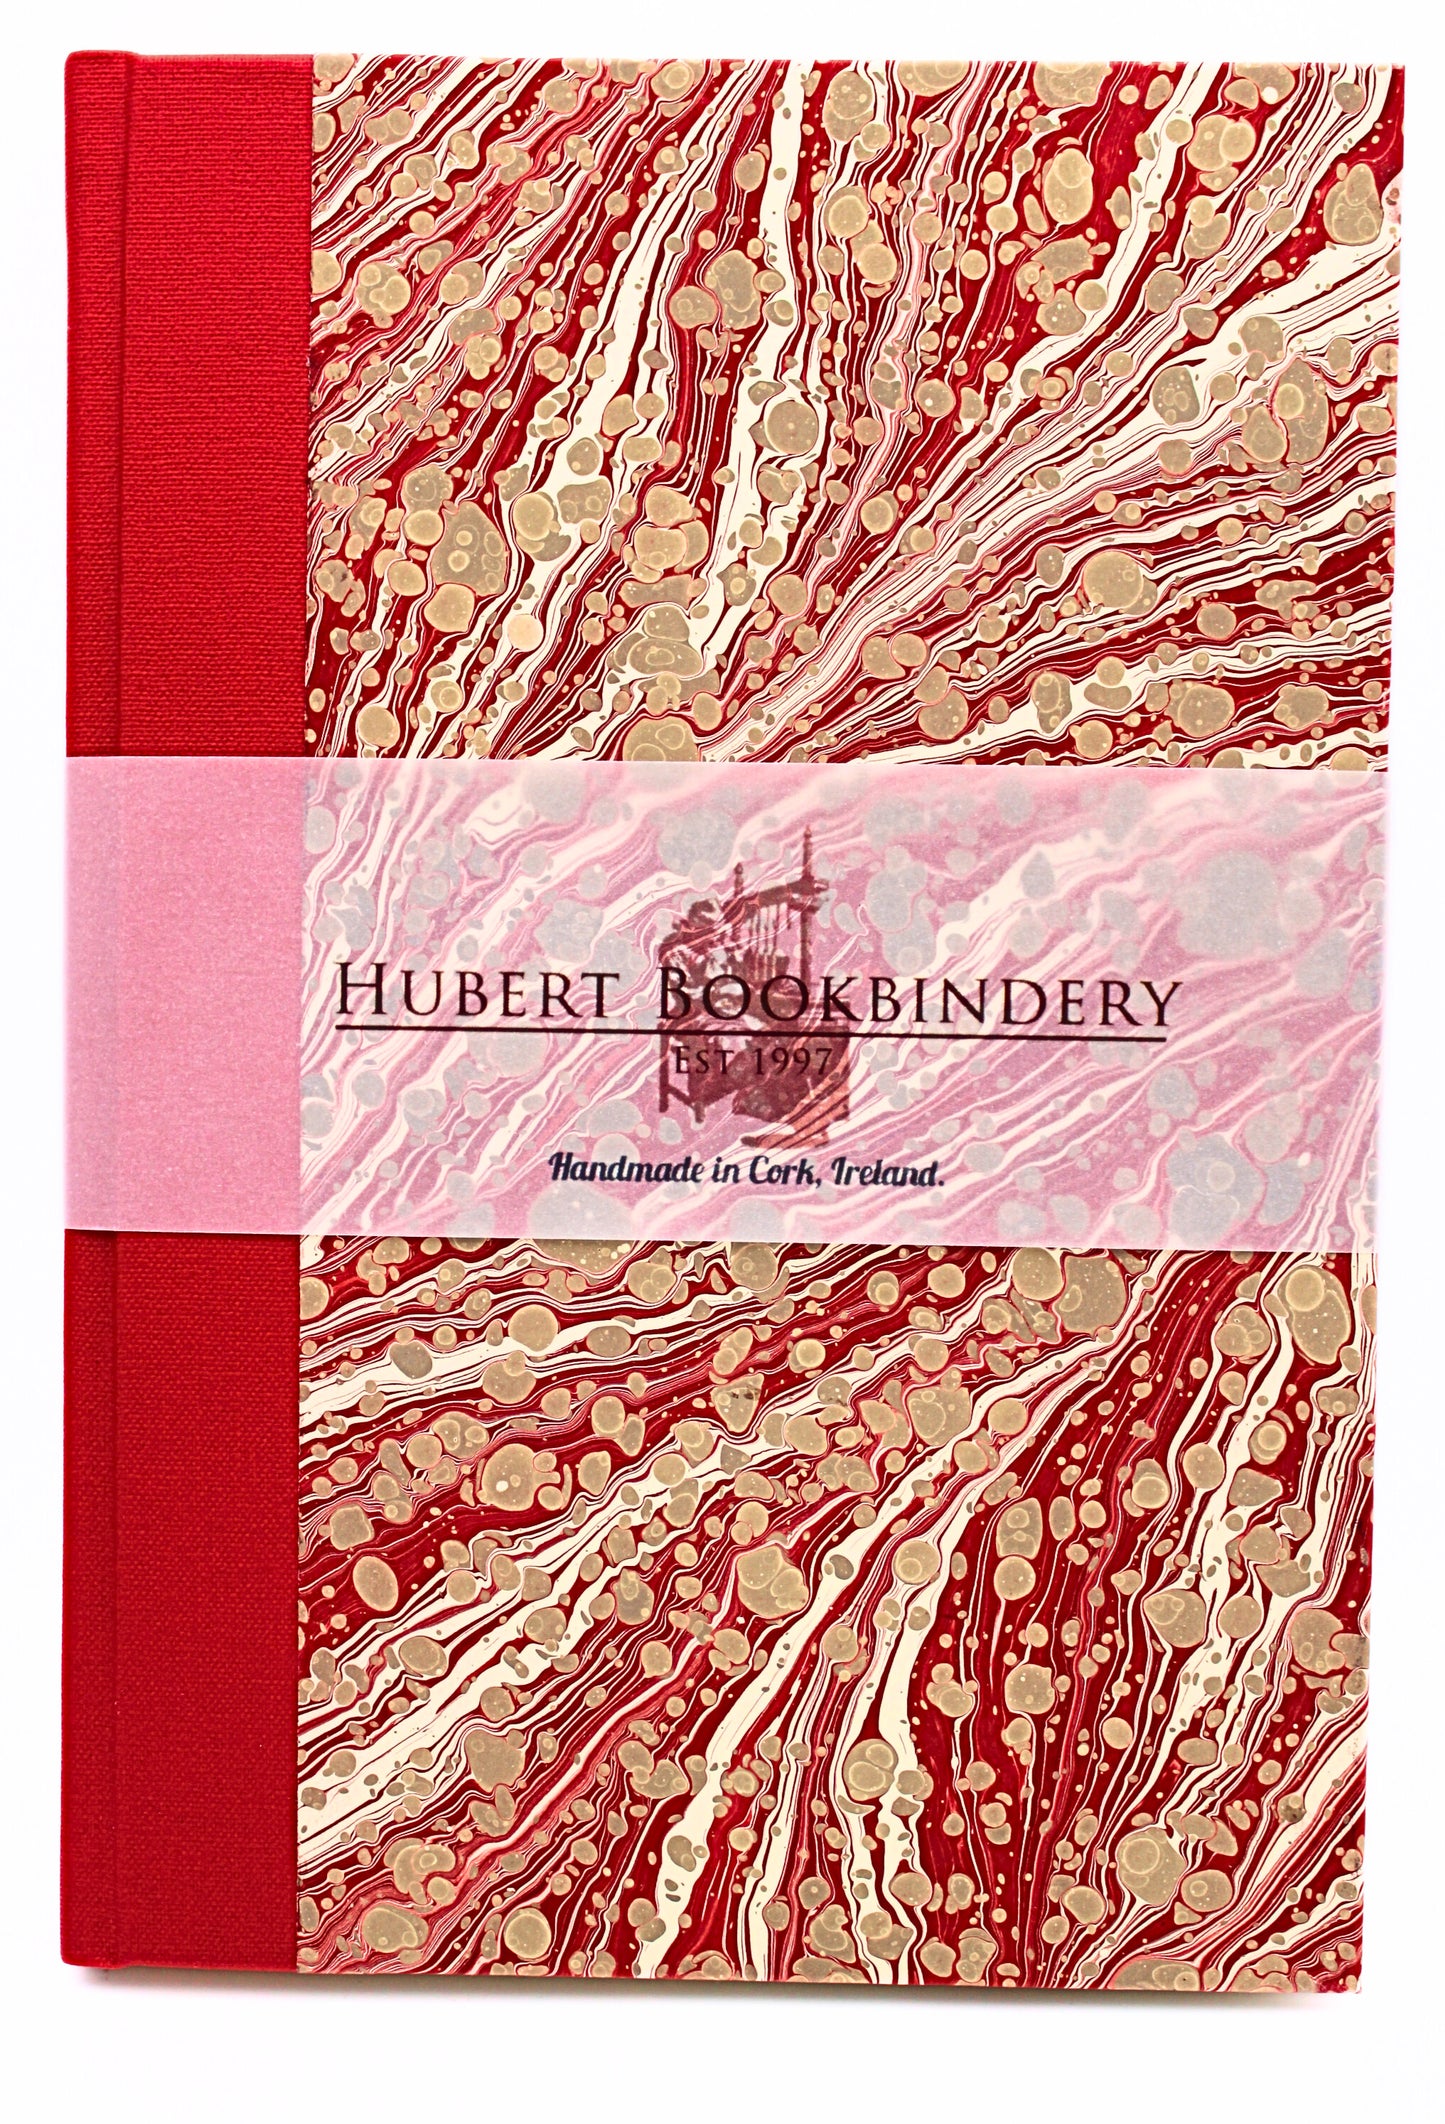 Hubert Bookbindery A5 Blank Notebook - Red Marbled Cover